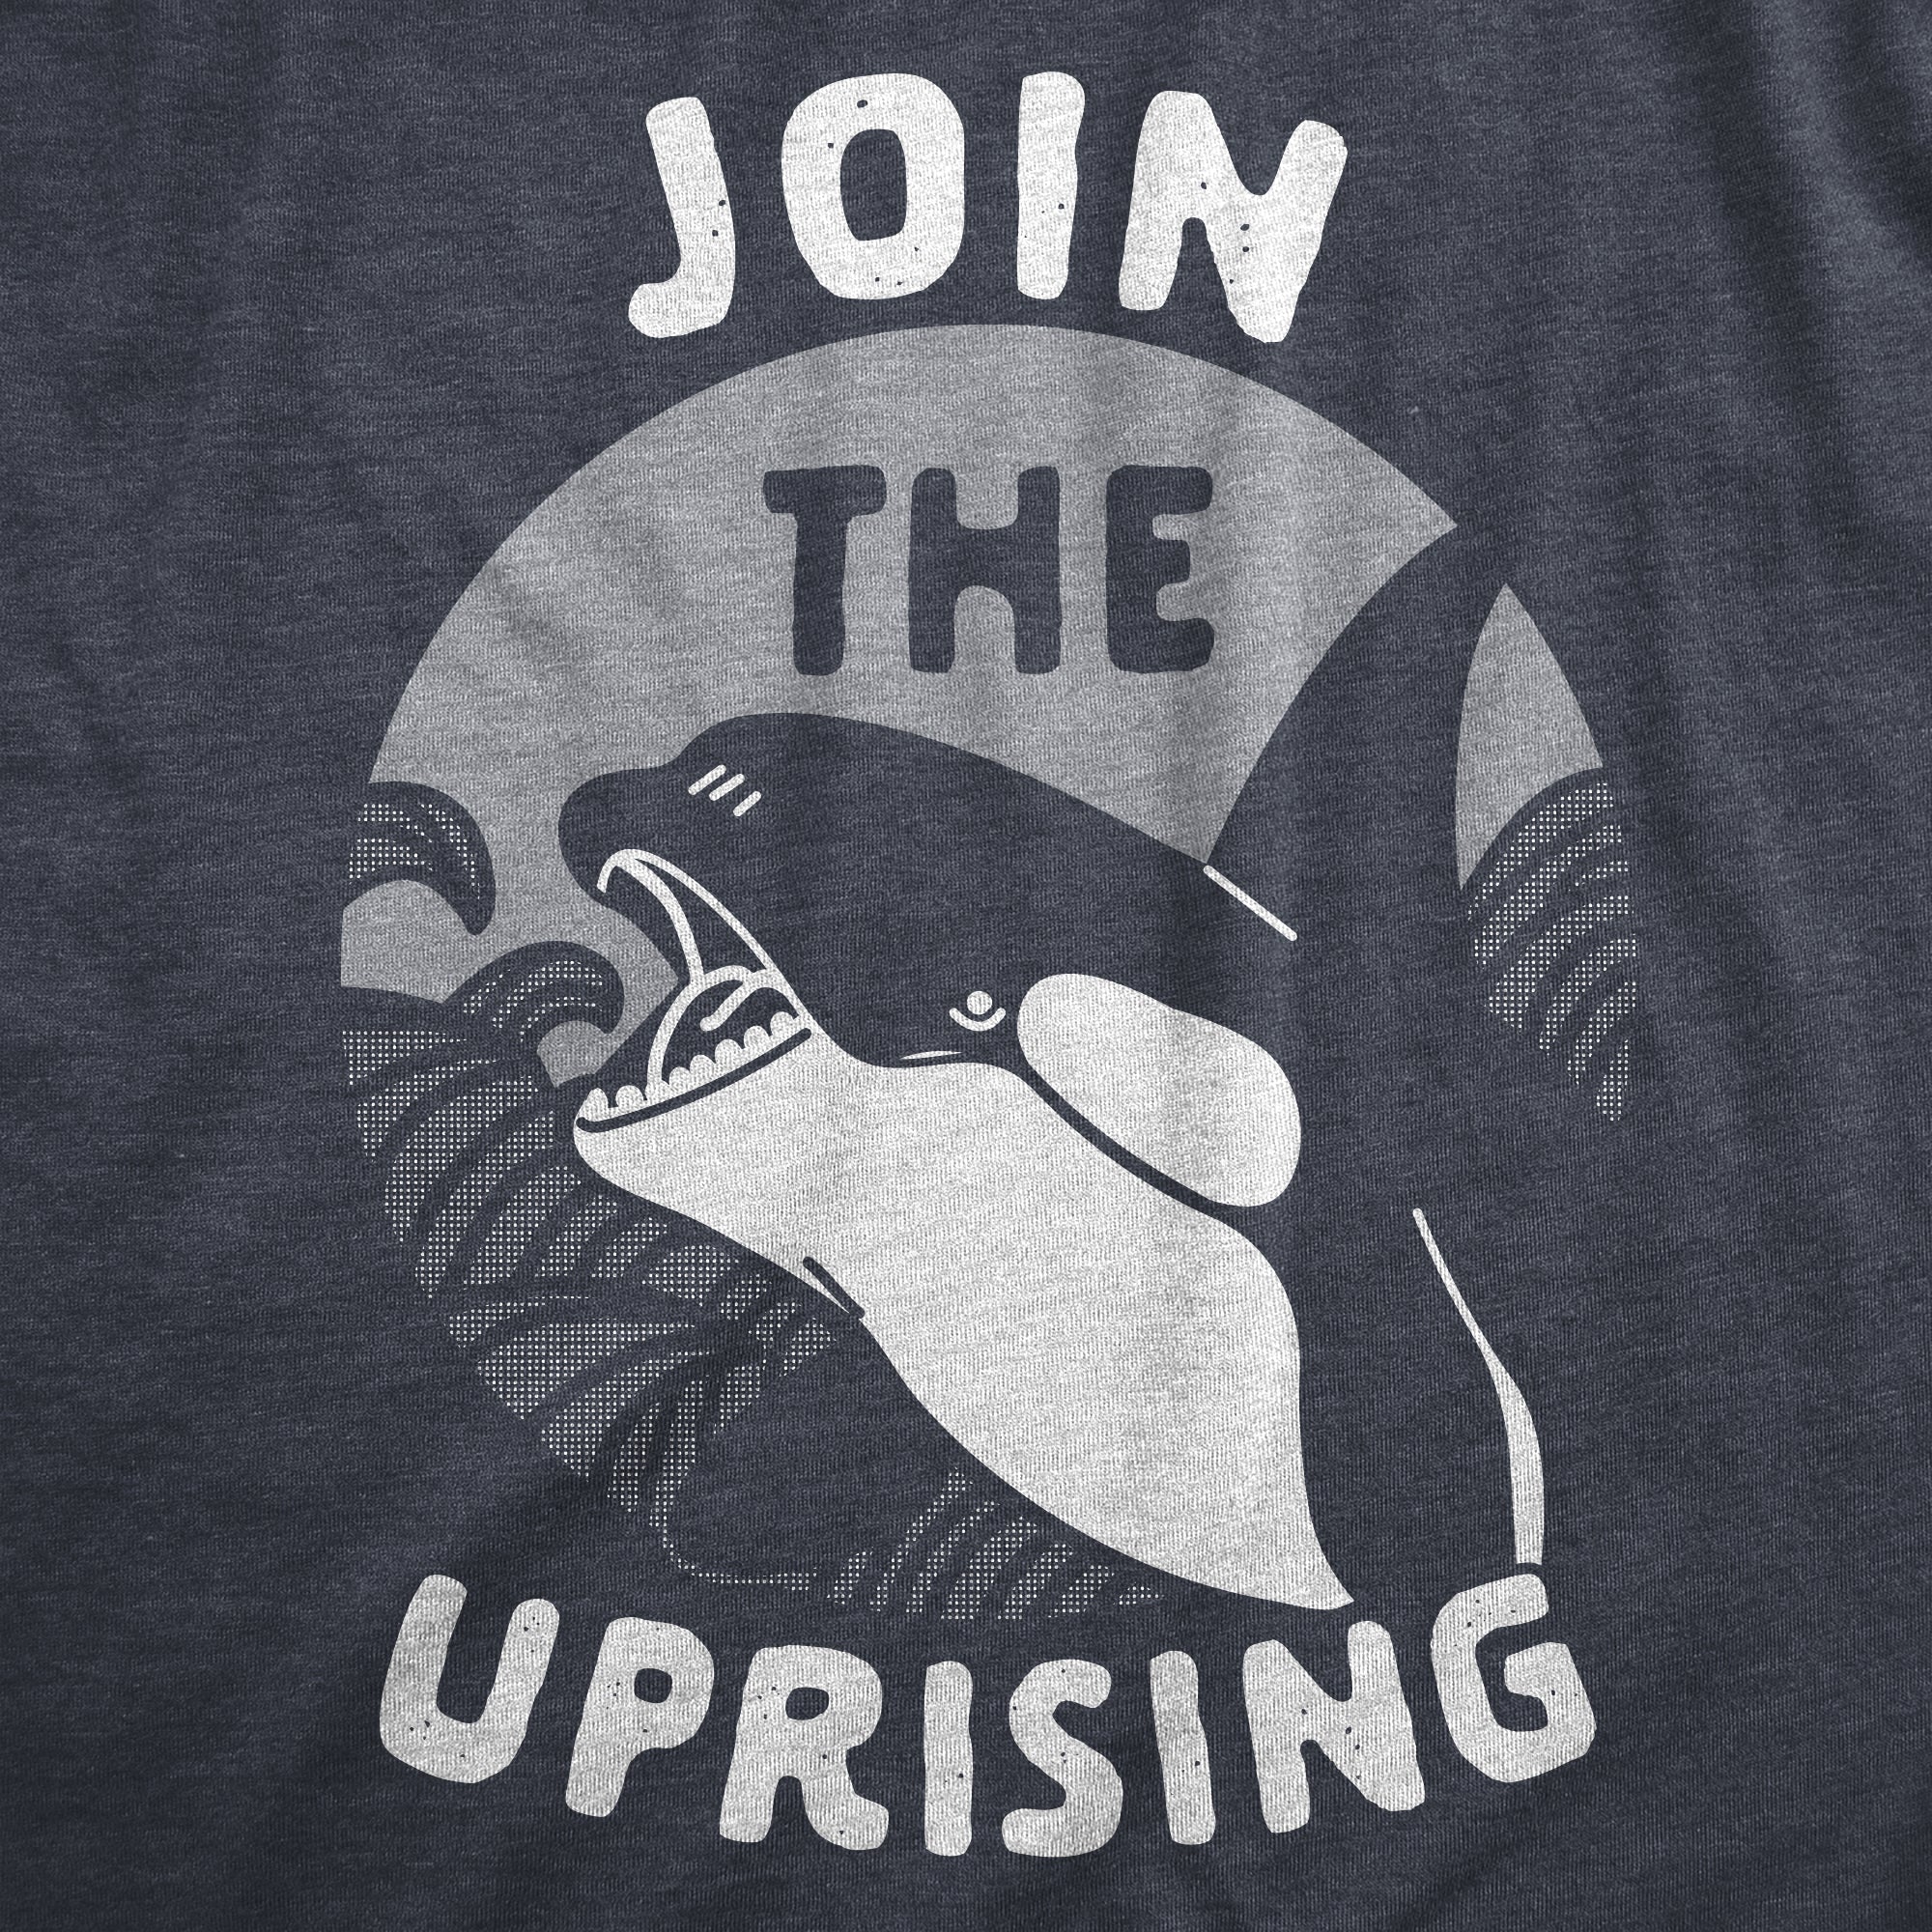 Funny Heather Navy - UPRISING Join The Uprising Mens T Shirt Nerdy Animal sarcastic Tee